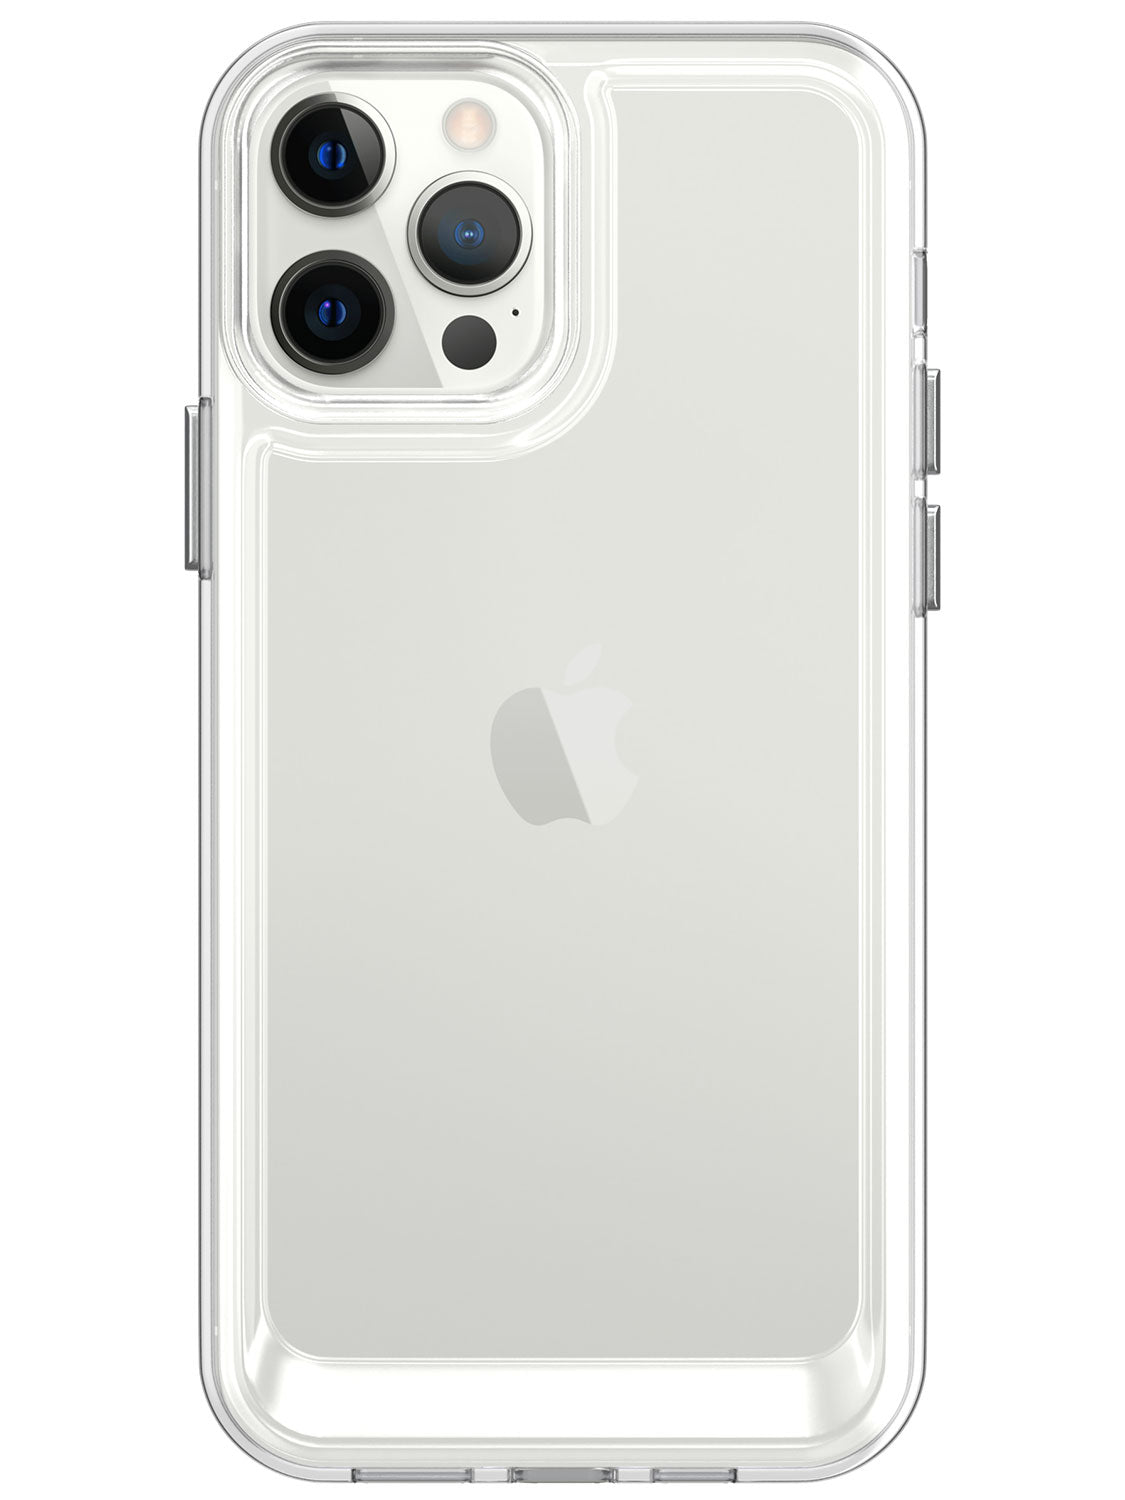 case for iPhone 12 Pro Max , back cover for iPhone 12 Pro Max , cases and covers for iPhone 12 Pro Max , clear case for iPhone 12 Pro Max , clear cover for iPhone 12 Pro Max , clear back cover for iPhone 12 Pro Max , transparent case for iPhone 12 Pro Max